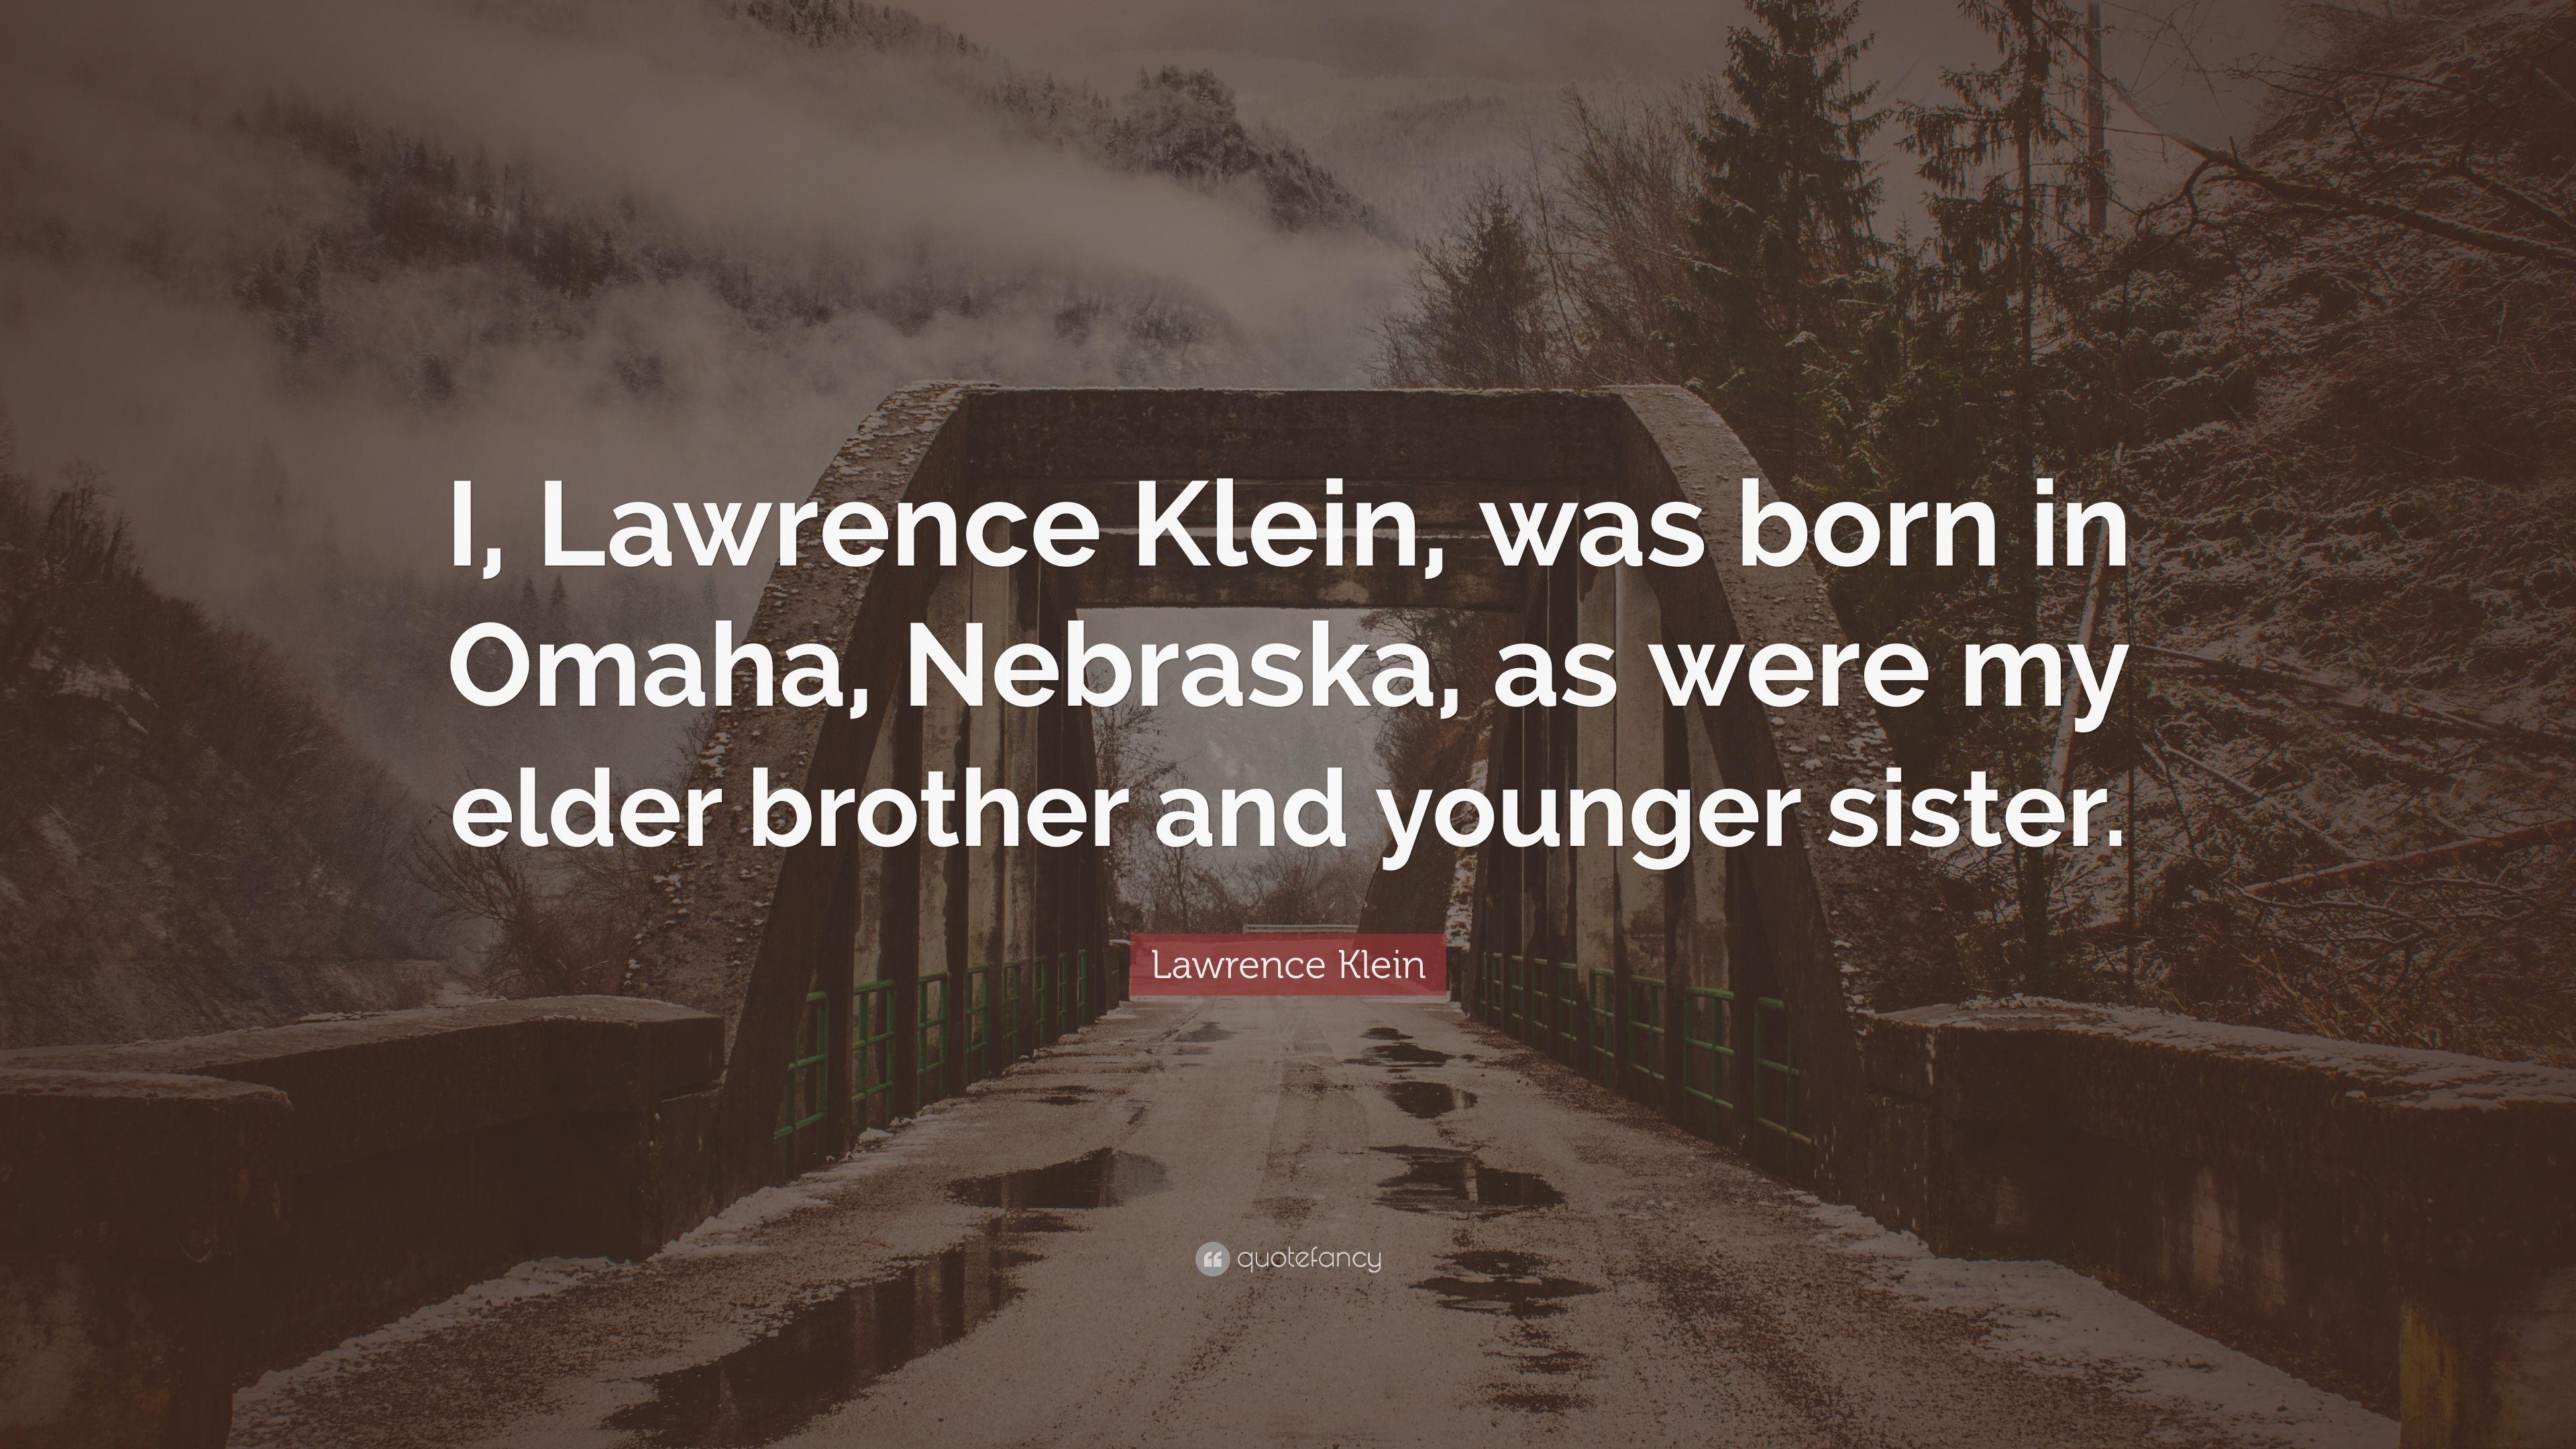 Lawrence Klein Quote: “I, Lawrence Klein, was born in Omaha